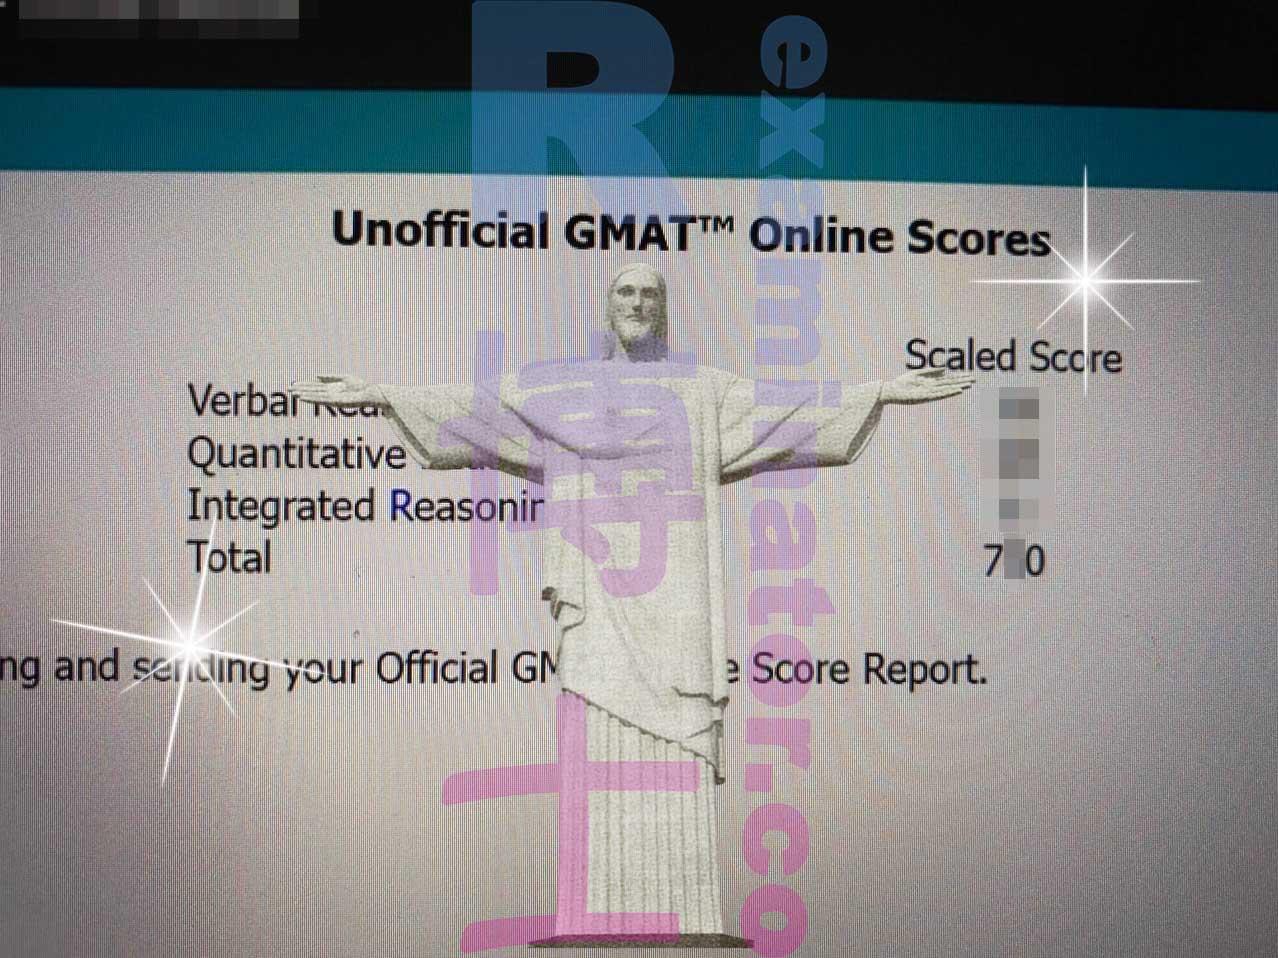 Score image for GMAT Cheating success story #367